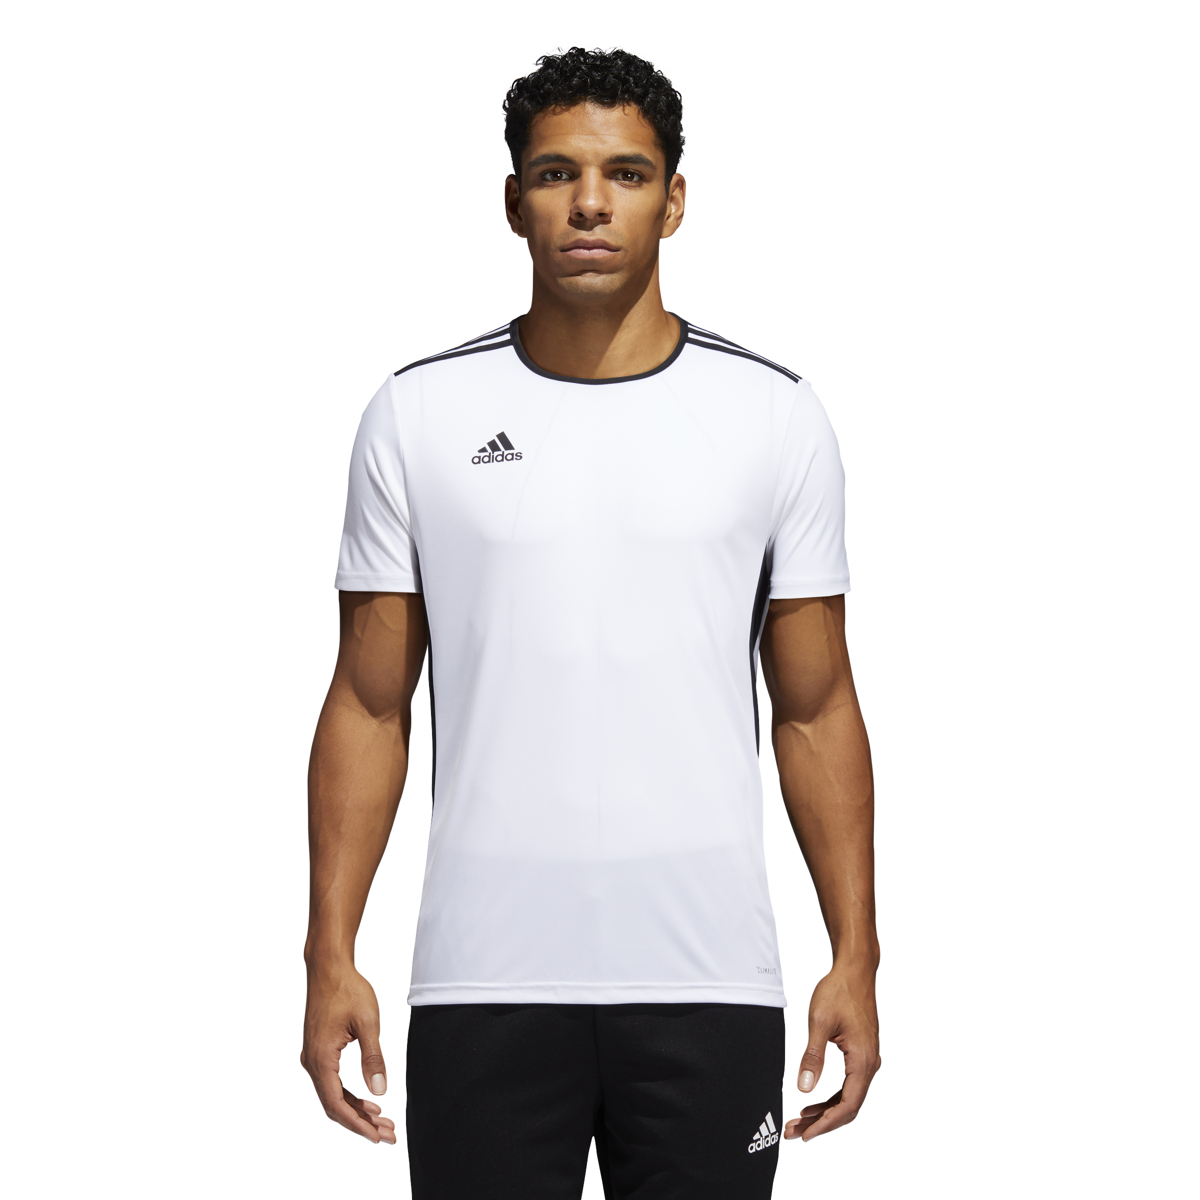 Adidas Men's Soccer Entrada 18 Jersey Adidas - Ships Directly From Adidas - image 3 of 6